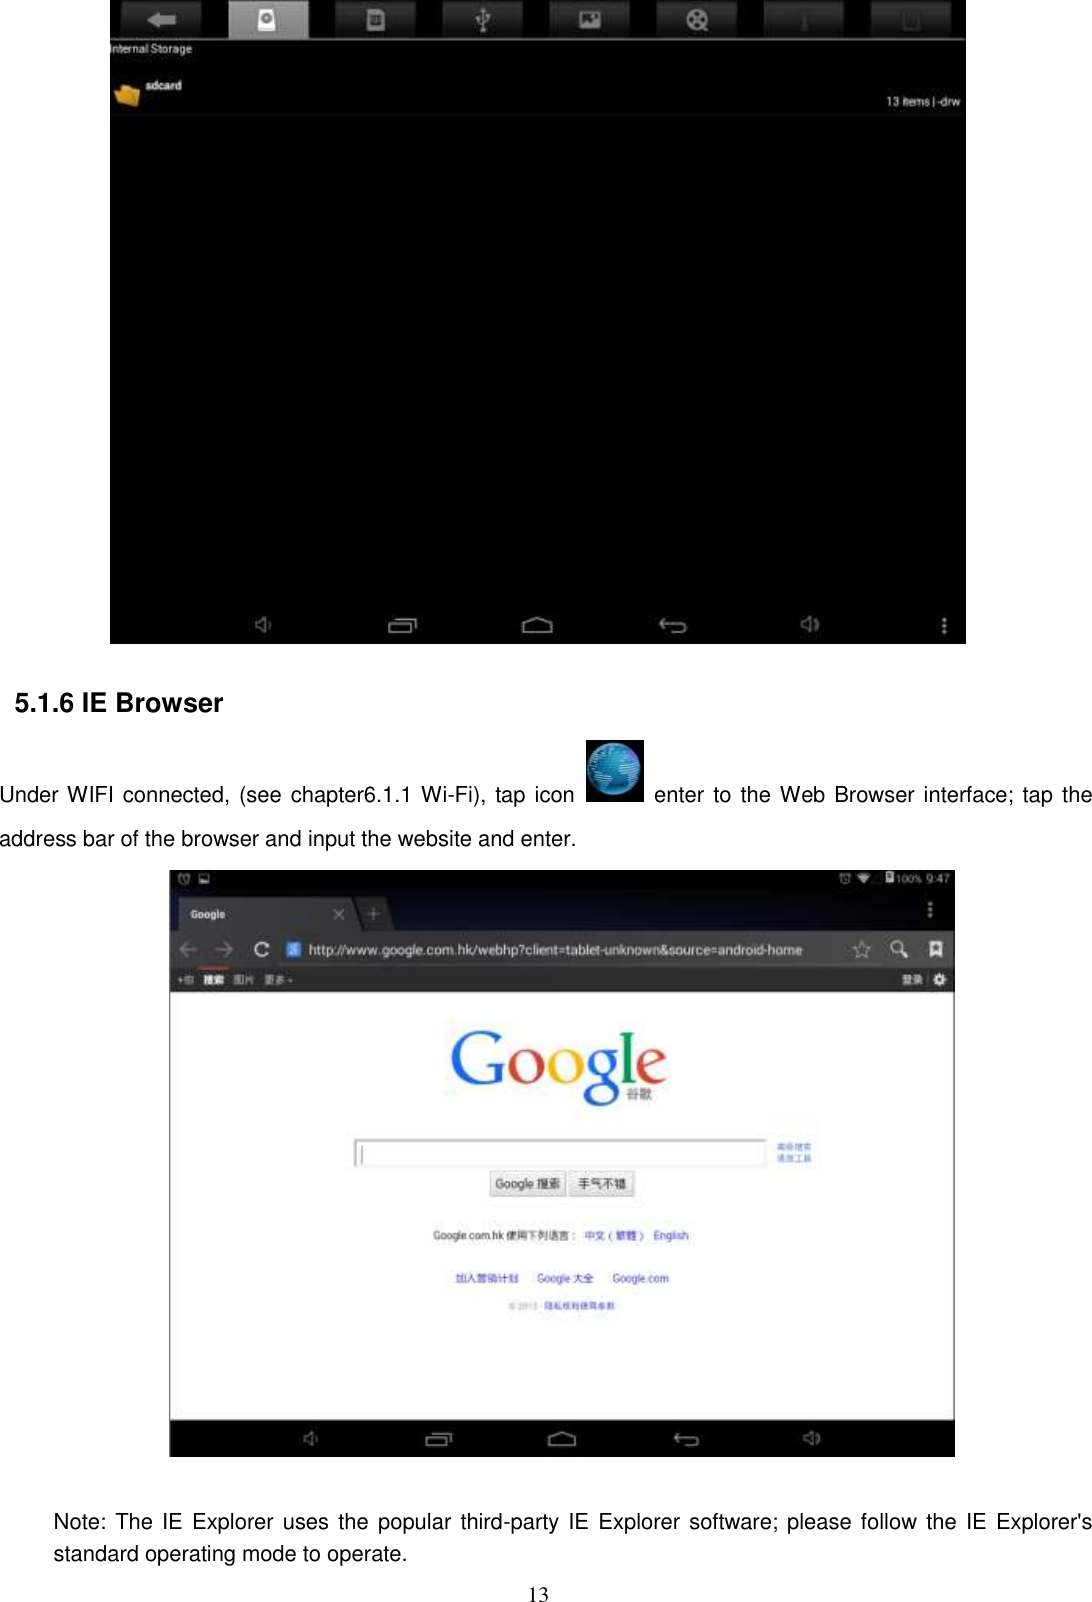  13   5.1.6 IE Browser Under WIFI connected, (see chapter6.1.1 Wi-Fi), tap icon   enter to the Web Browser interface; tap the address bar of the browser and input the website and enter.   Note: The IE  Explorer uses the popular third-party IE  Explorer software; please follow  the IE Explorer&apos;s standard operating mode to operate. 